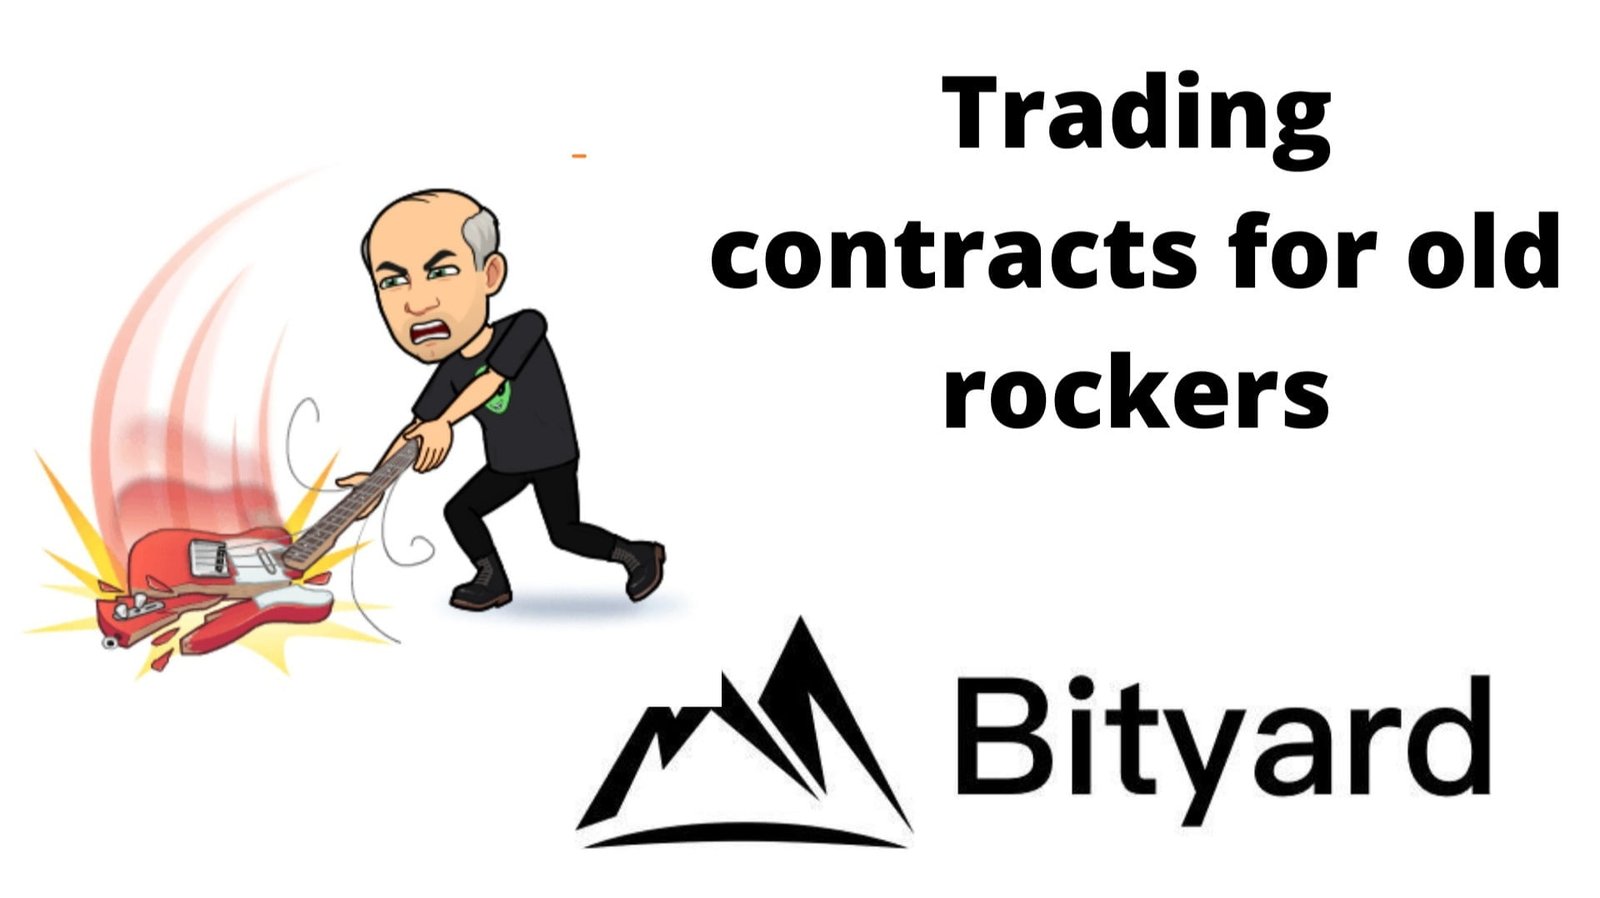 TRADING CONTRACTS FOR OLD ROCKERS - Bityard 2